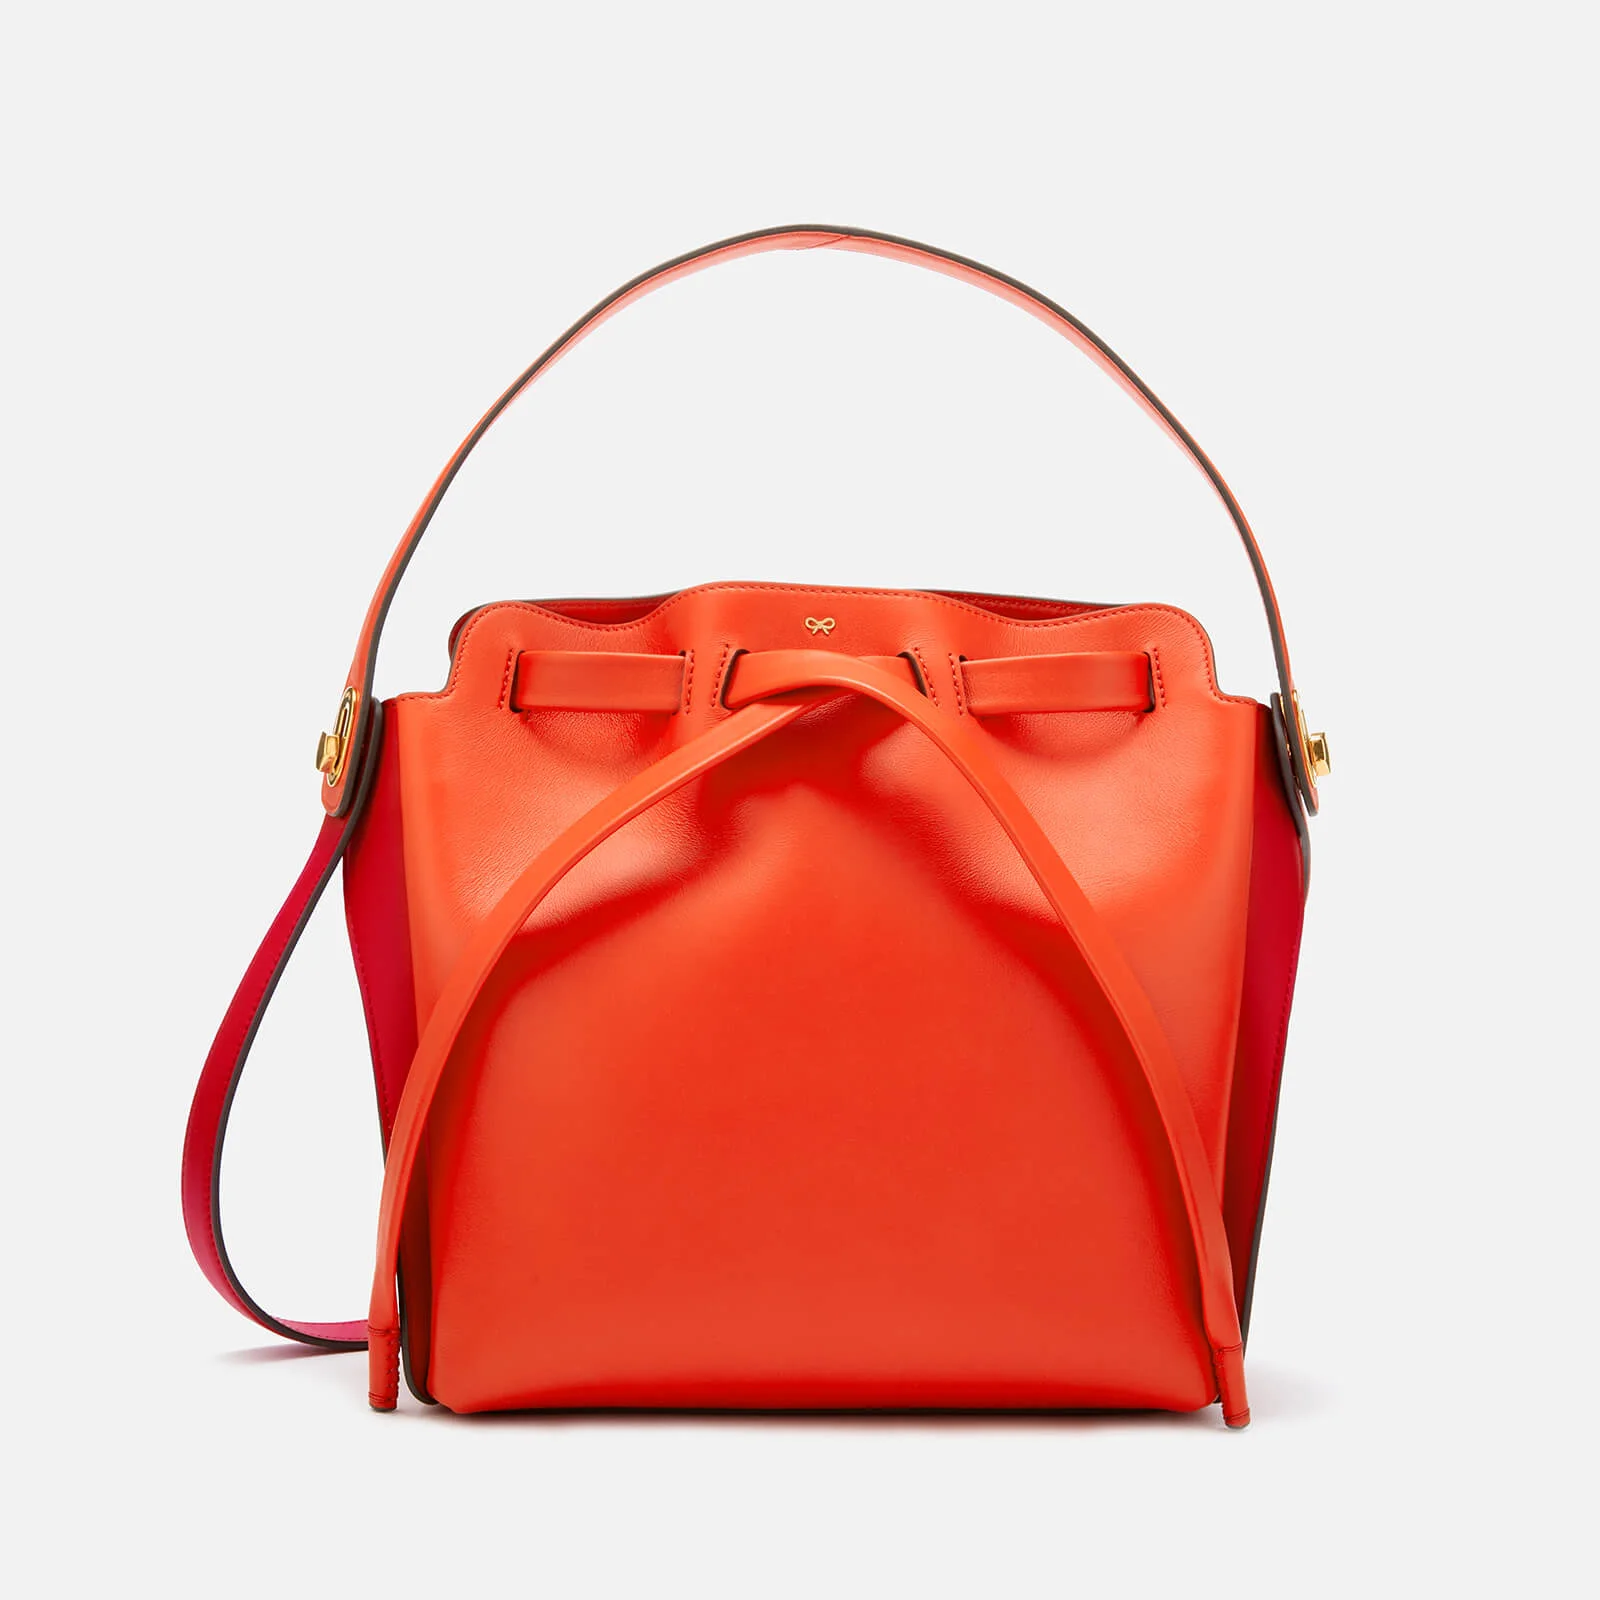 Anya Hindmarch Women's Shoelace Drawstring Mall Bag - Red Image 1